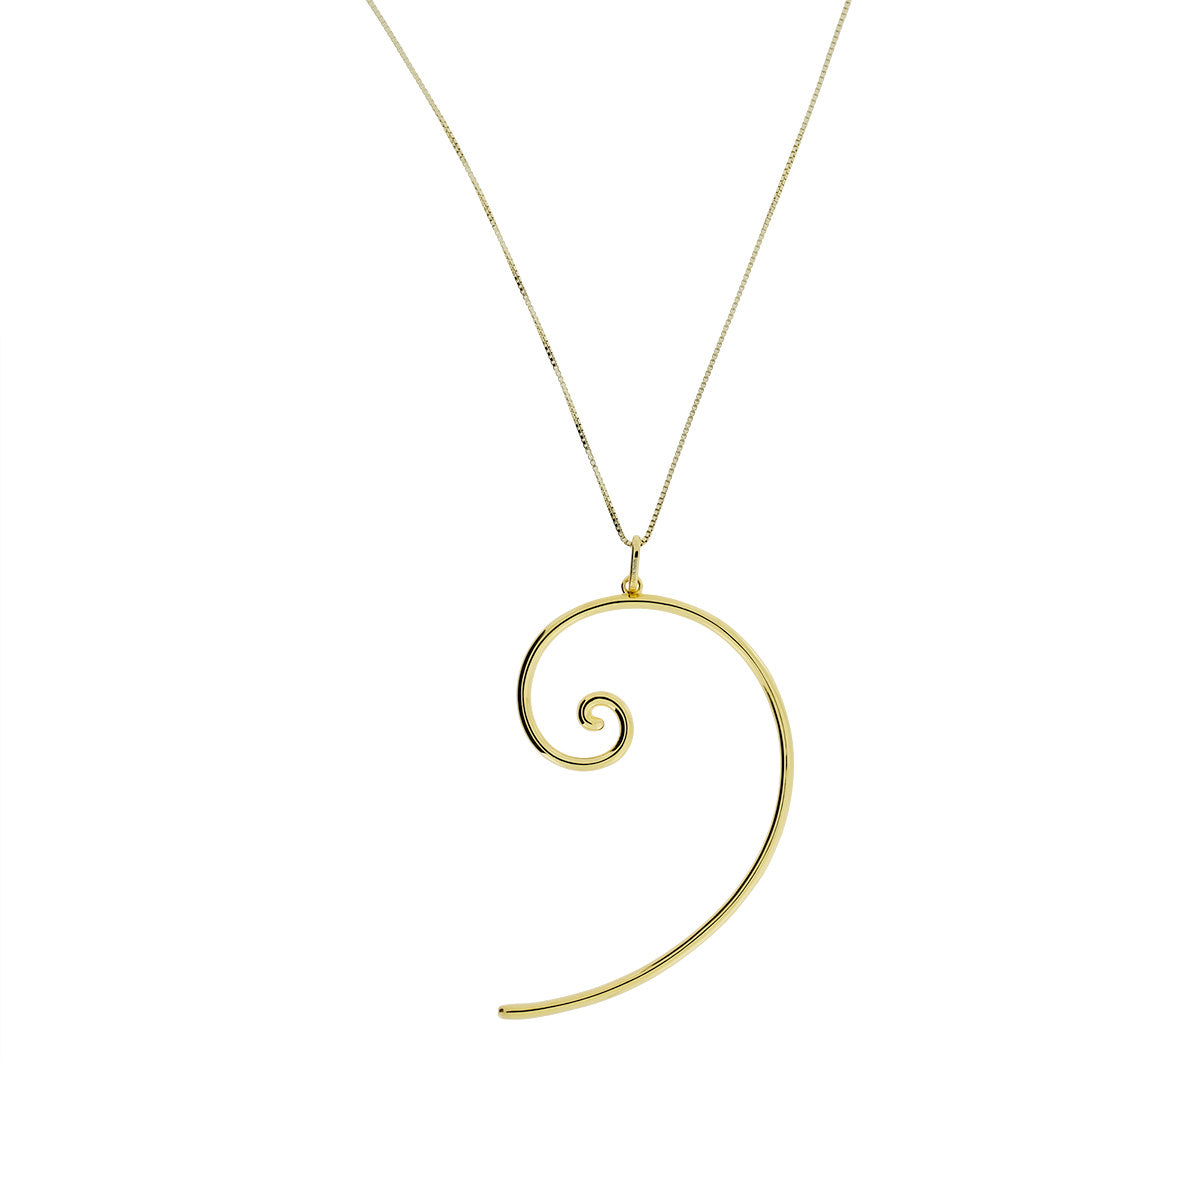 Large Spiral Pendant in Yellow Gold Vermeil